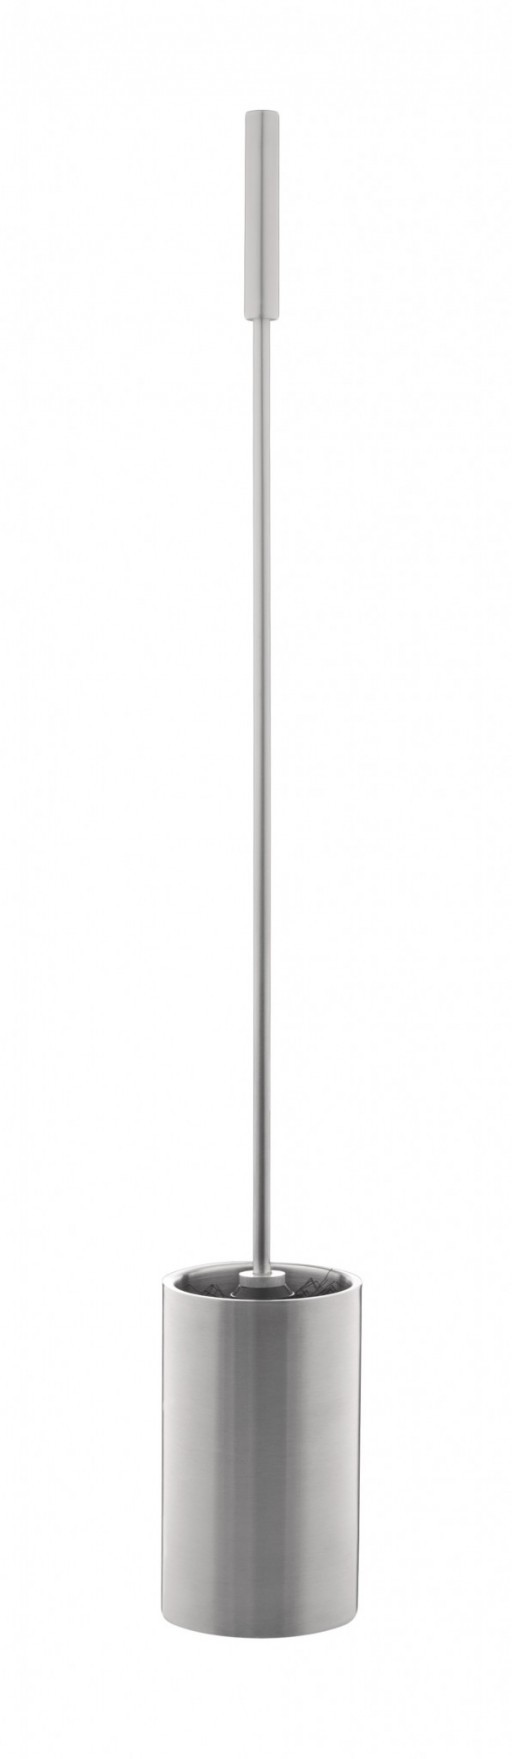 Comfort Toilet Brush With Long Handle